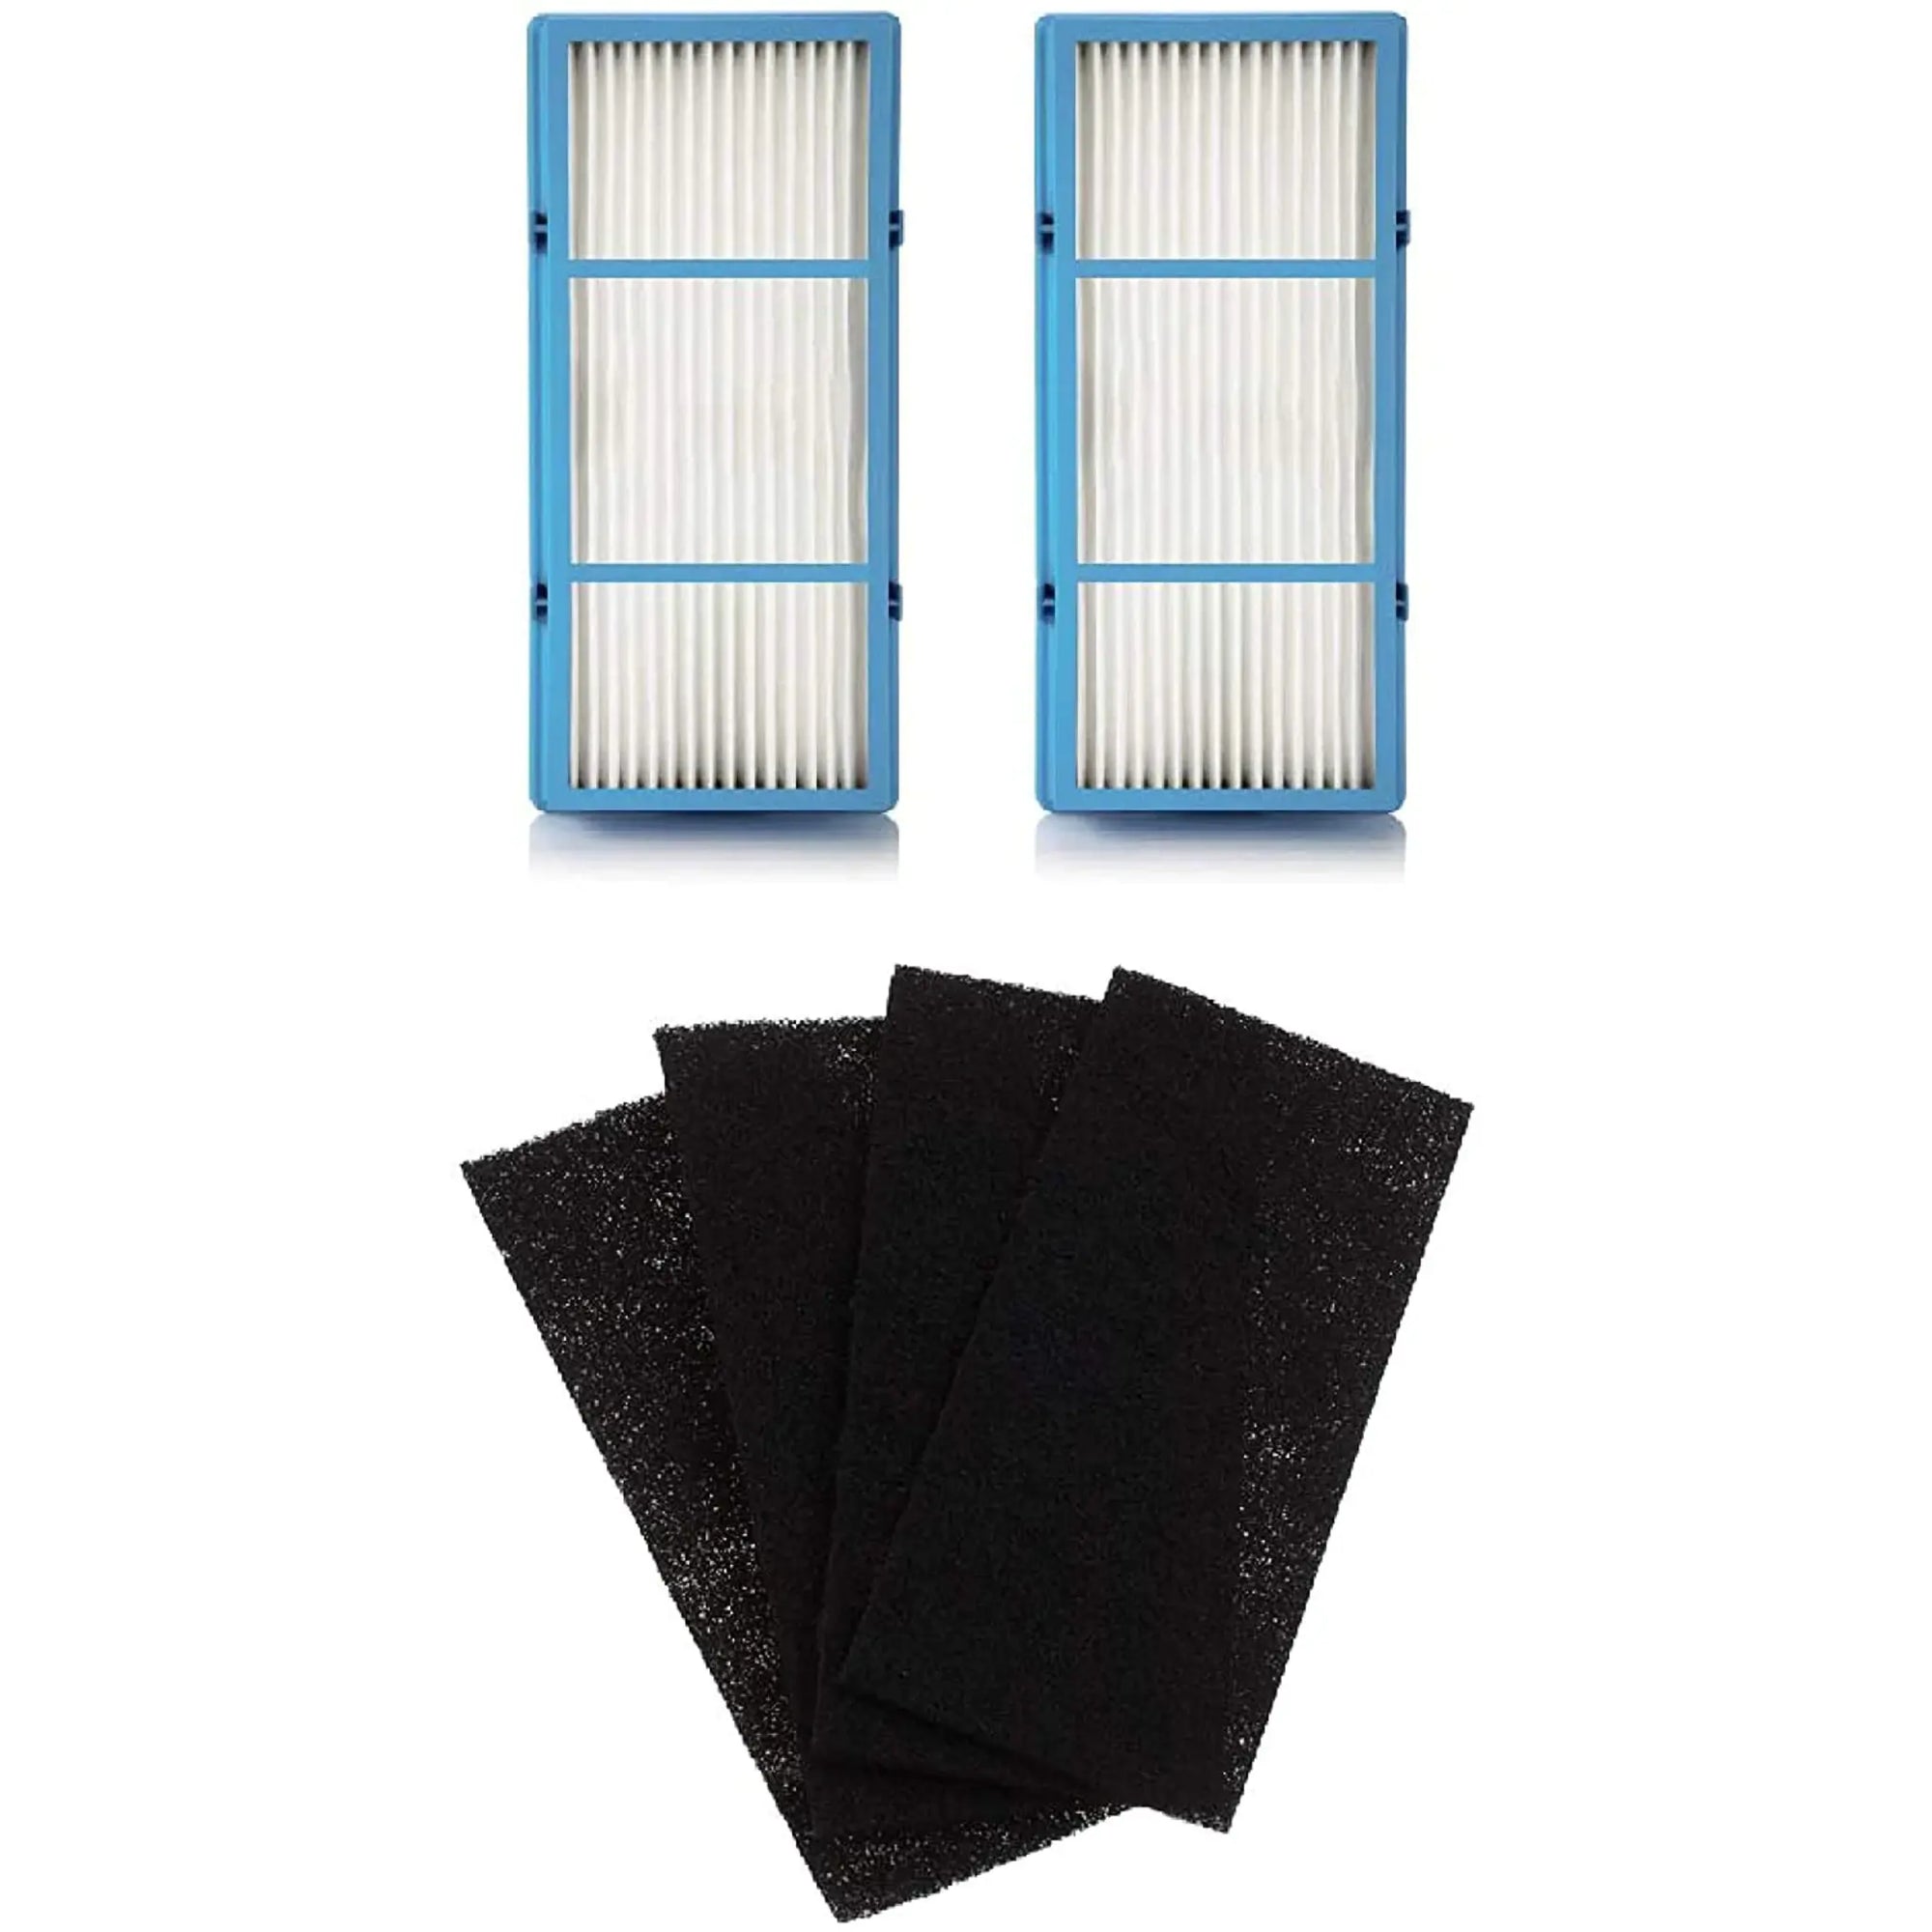 Nispira True HEPA Filter Compatible with Levoit Air Purifier LV-H128-R